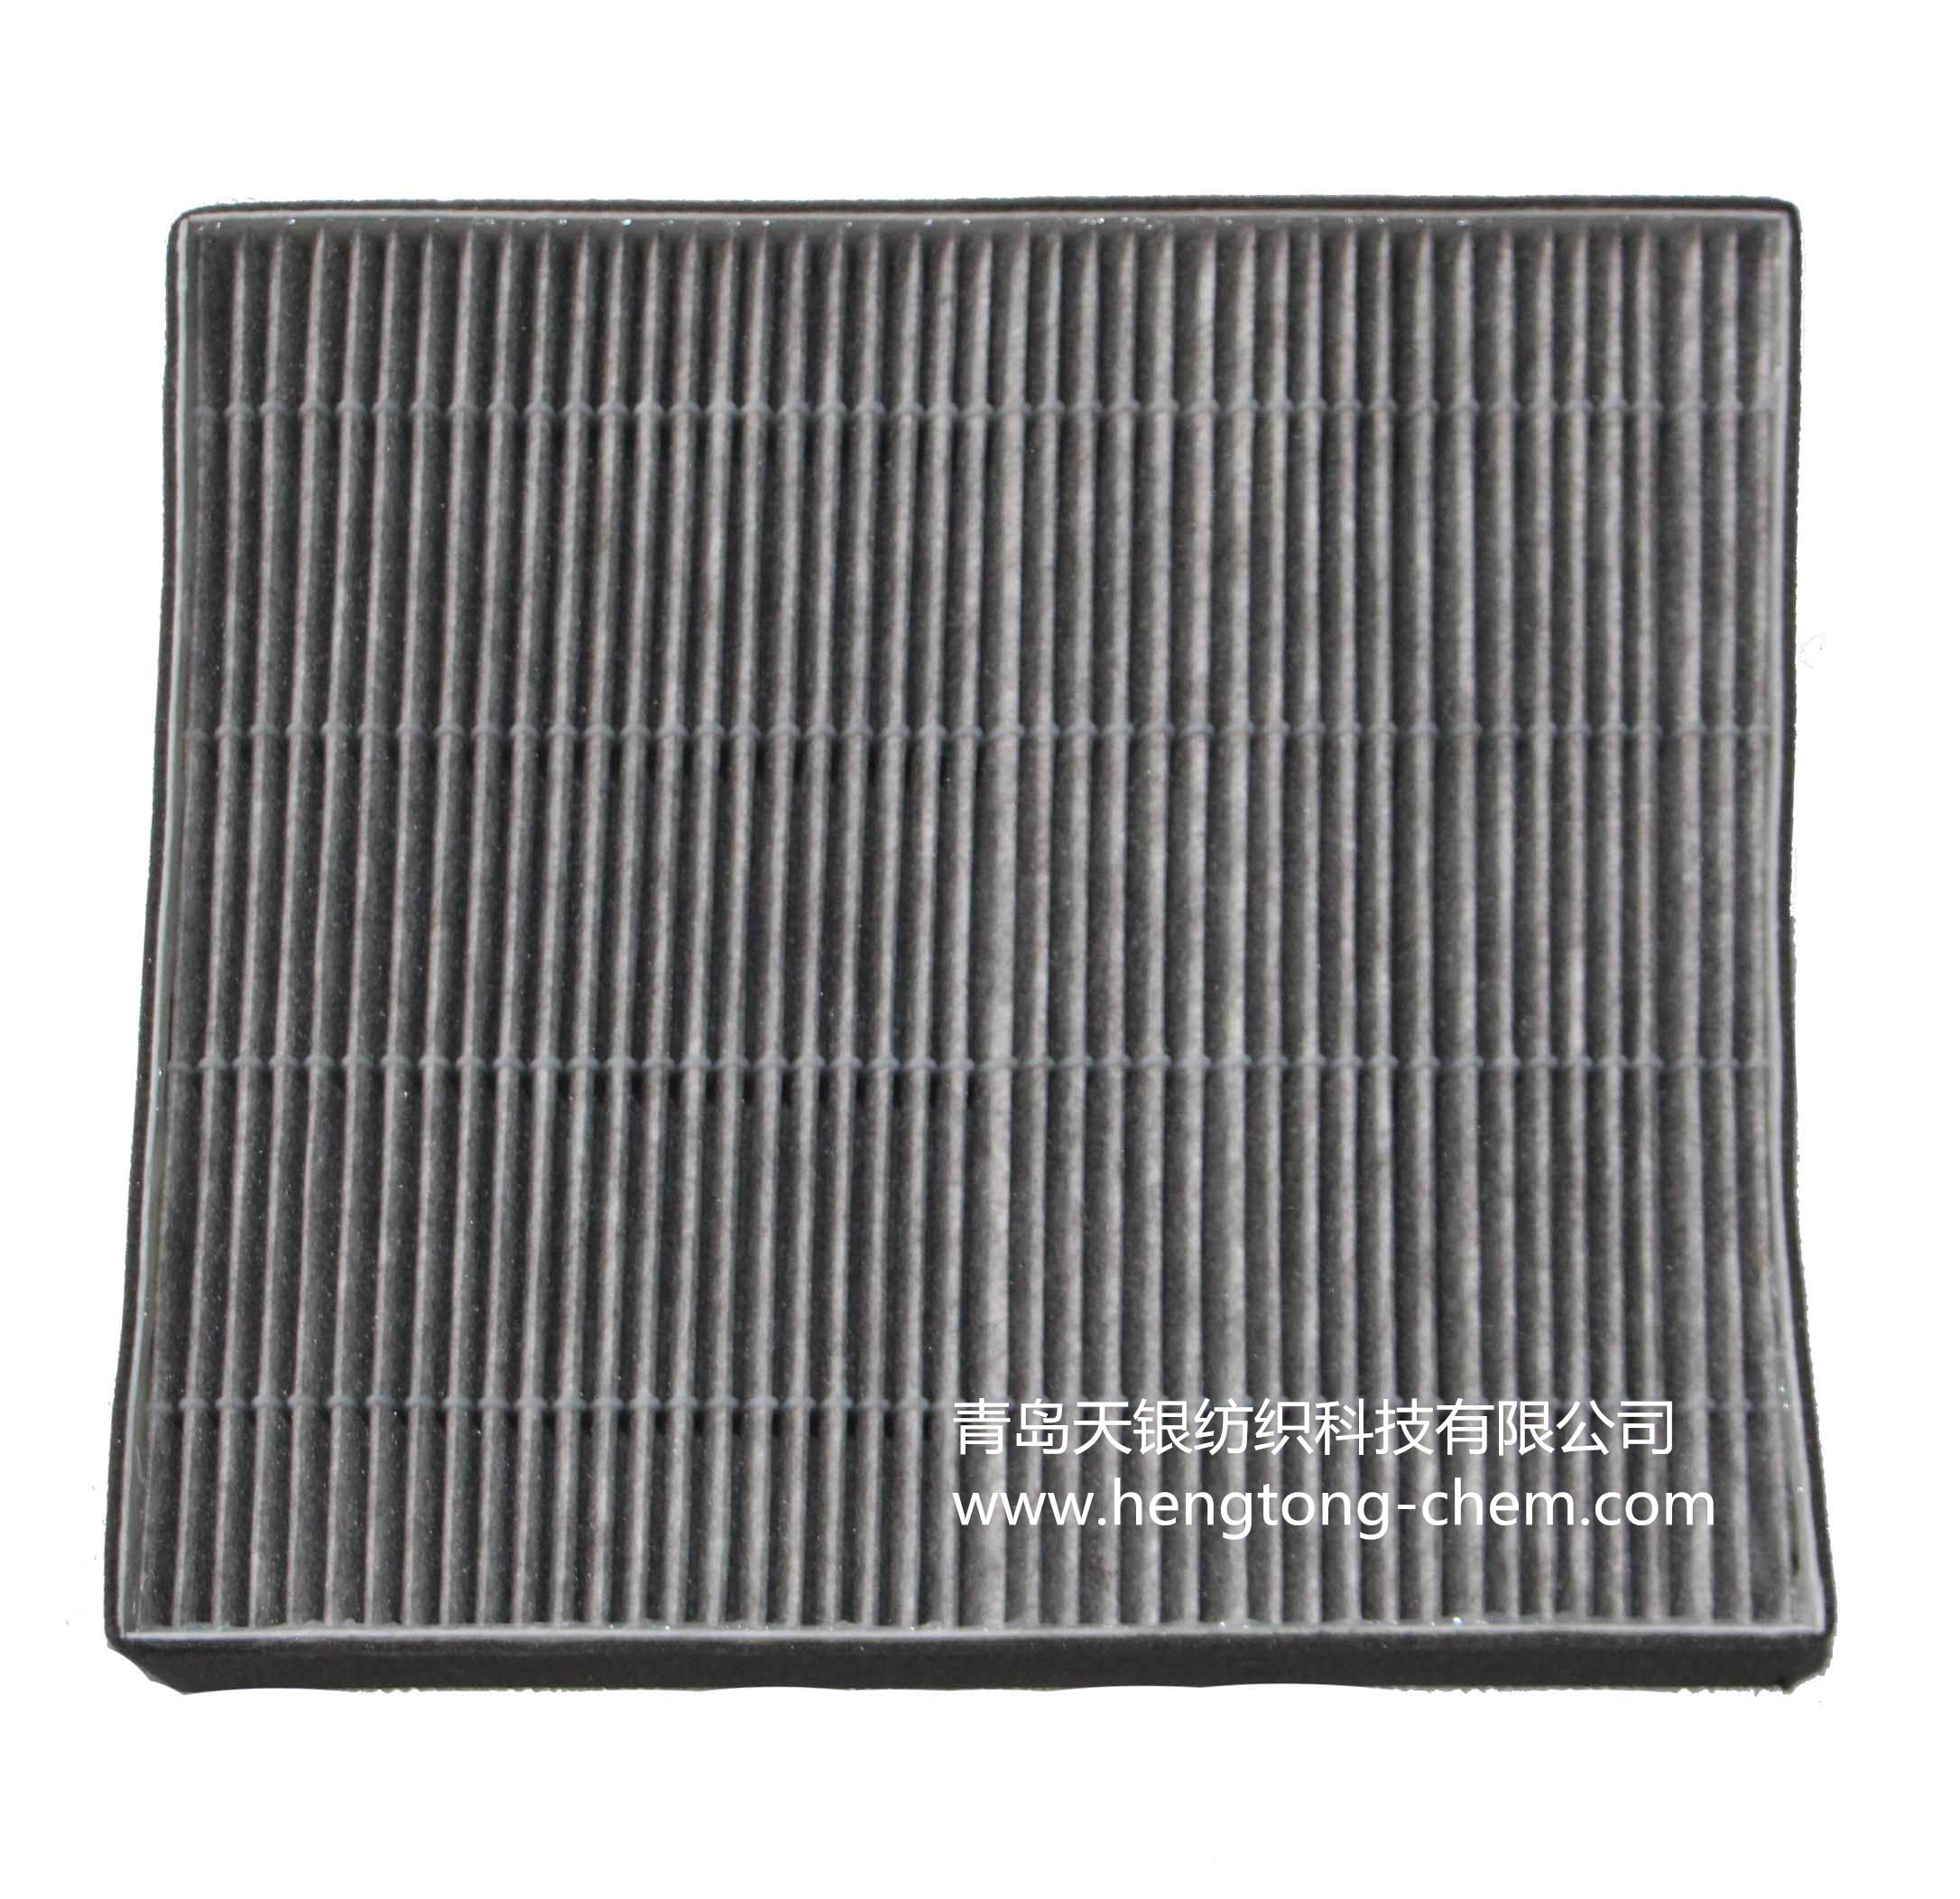 Anti-bacterial filter for air conditioning filtration